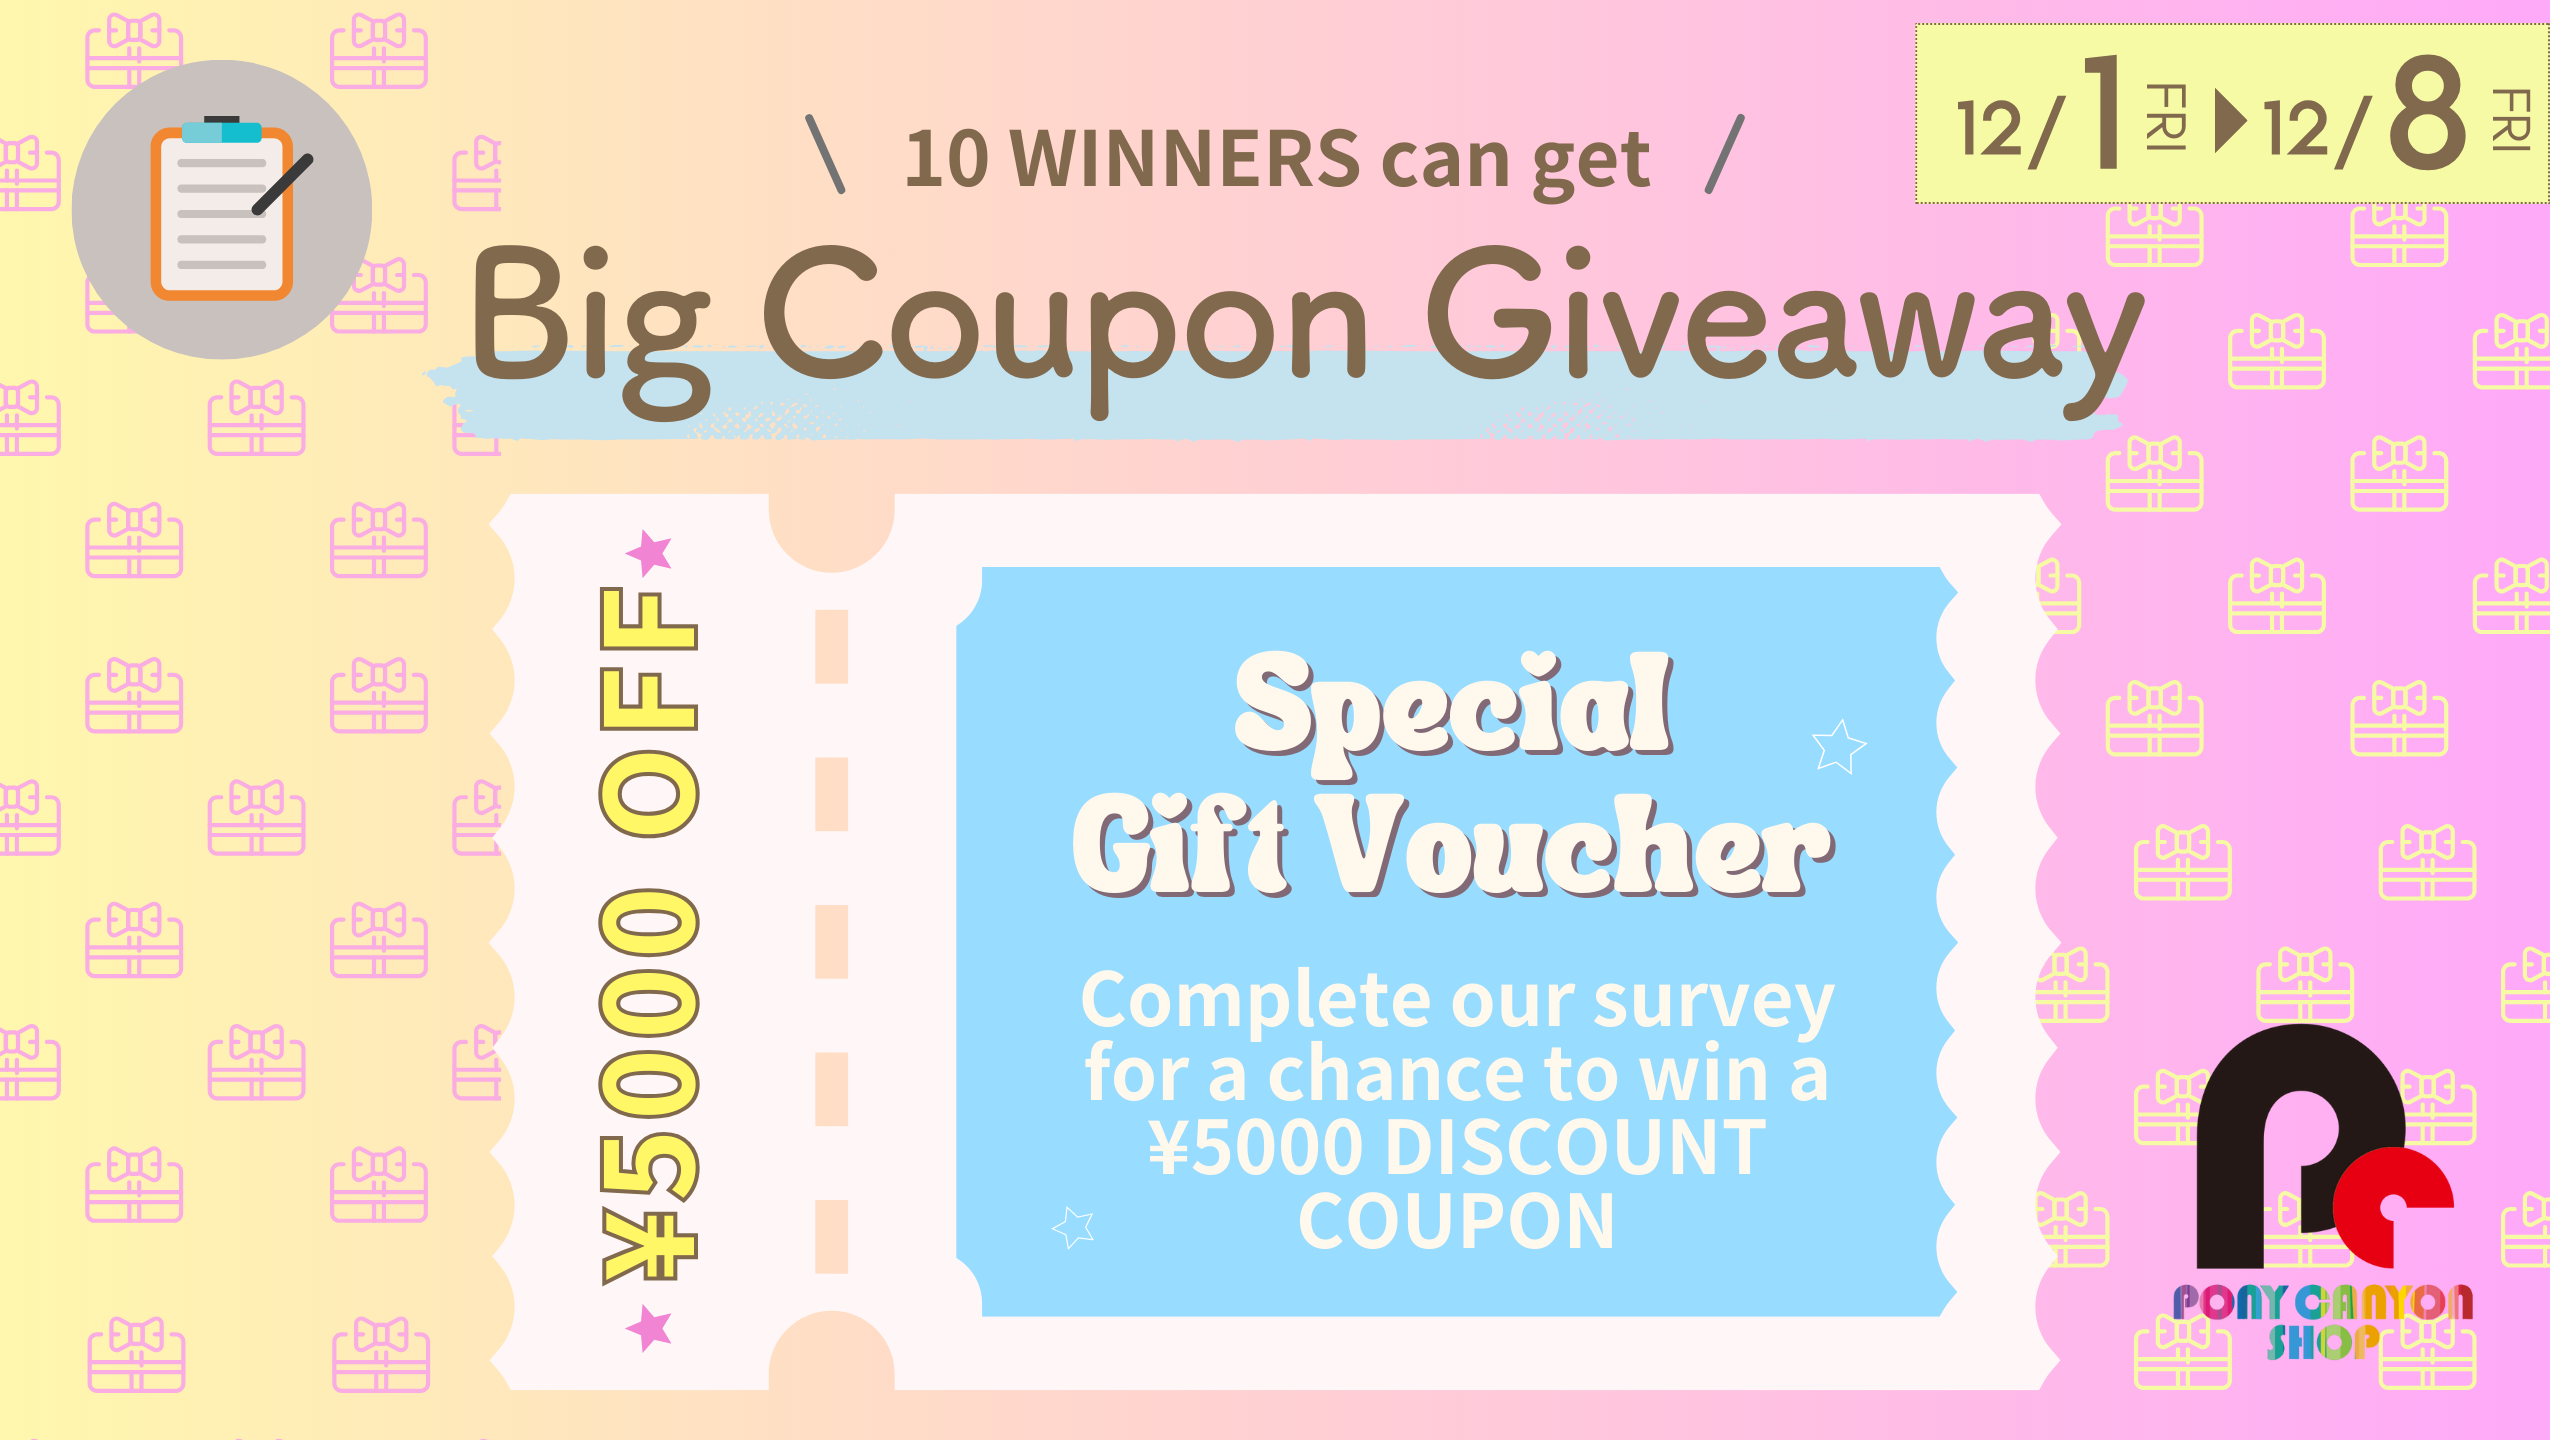 PONYCANYON SHOP Christmas Giveaway: Complete our Survey & Win a Discount Coupon!